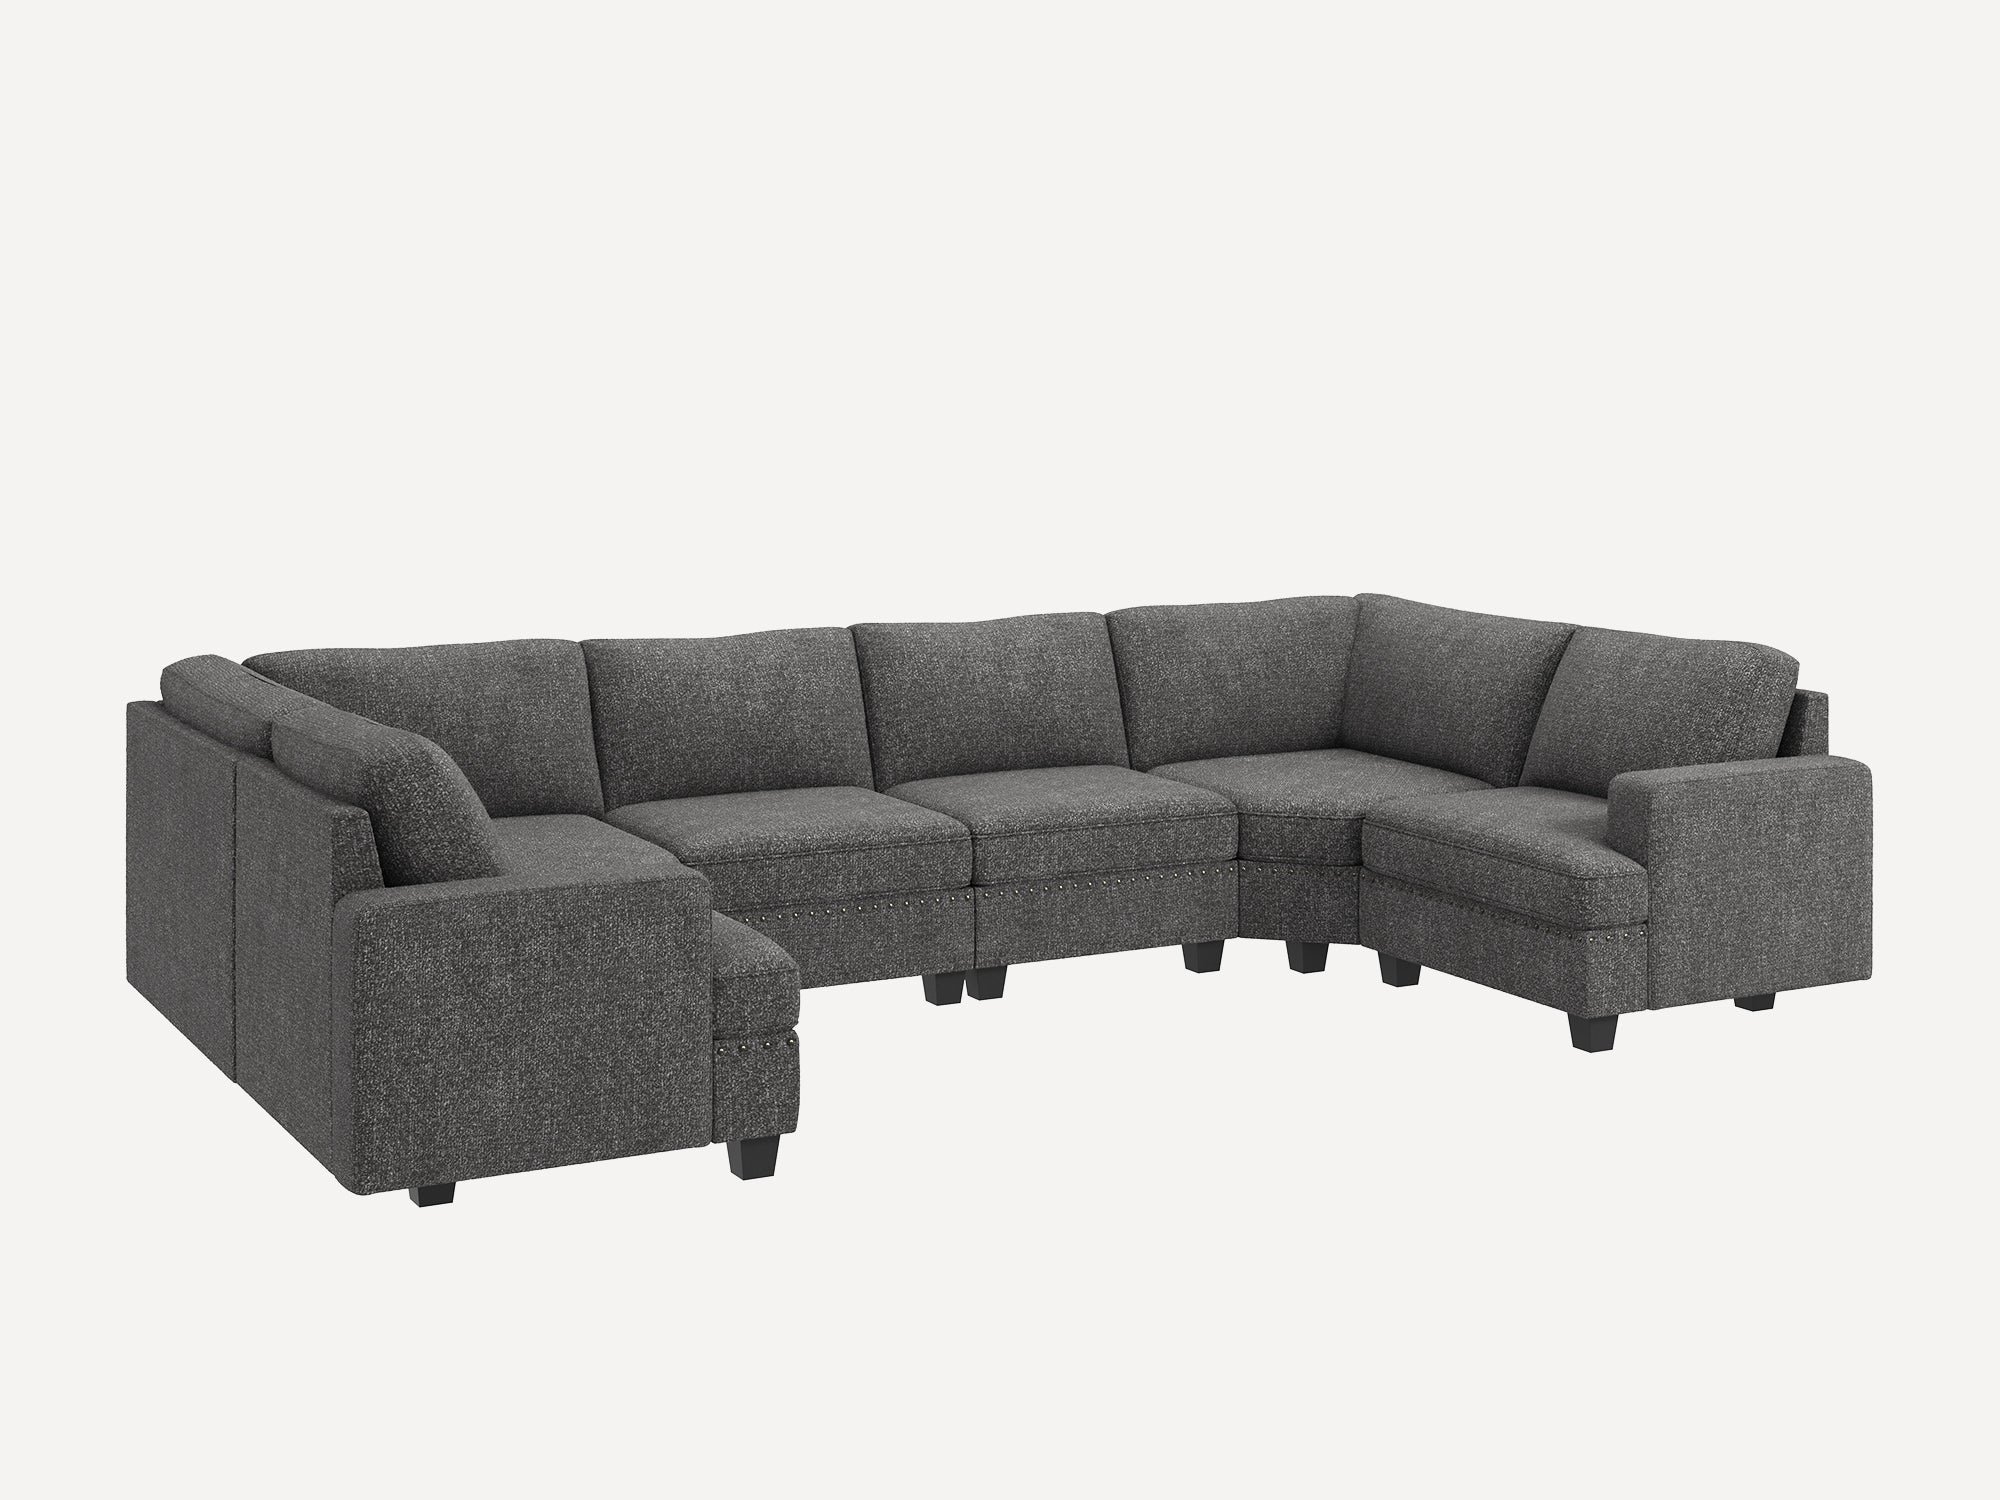 HONBAY 6-Seat U Shaped Corner Modular Sofa Oversized Sectional Sofa Couch for Living Room #Color_Light Grey